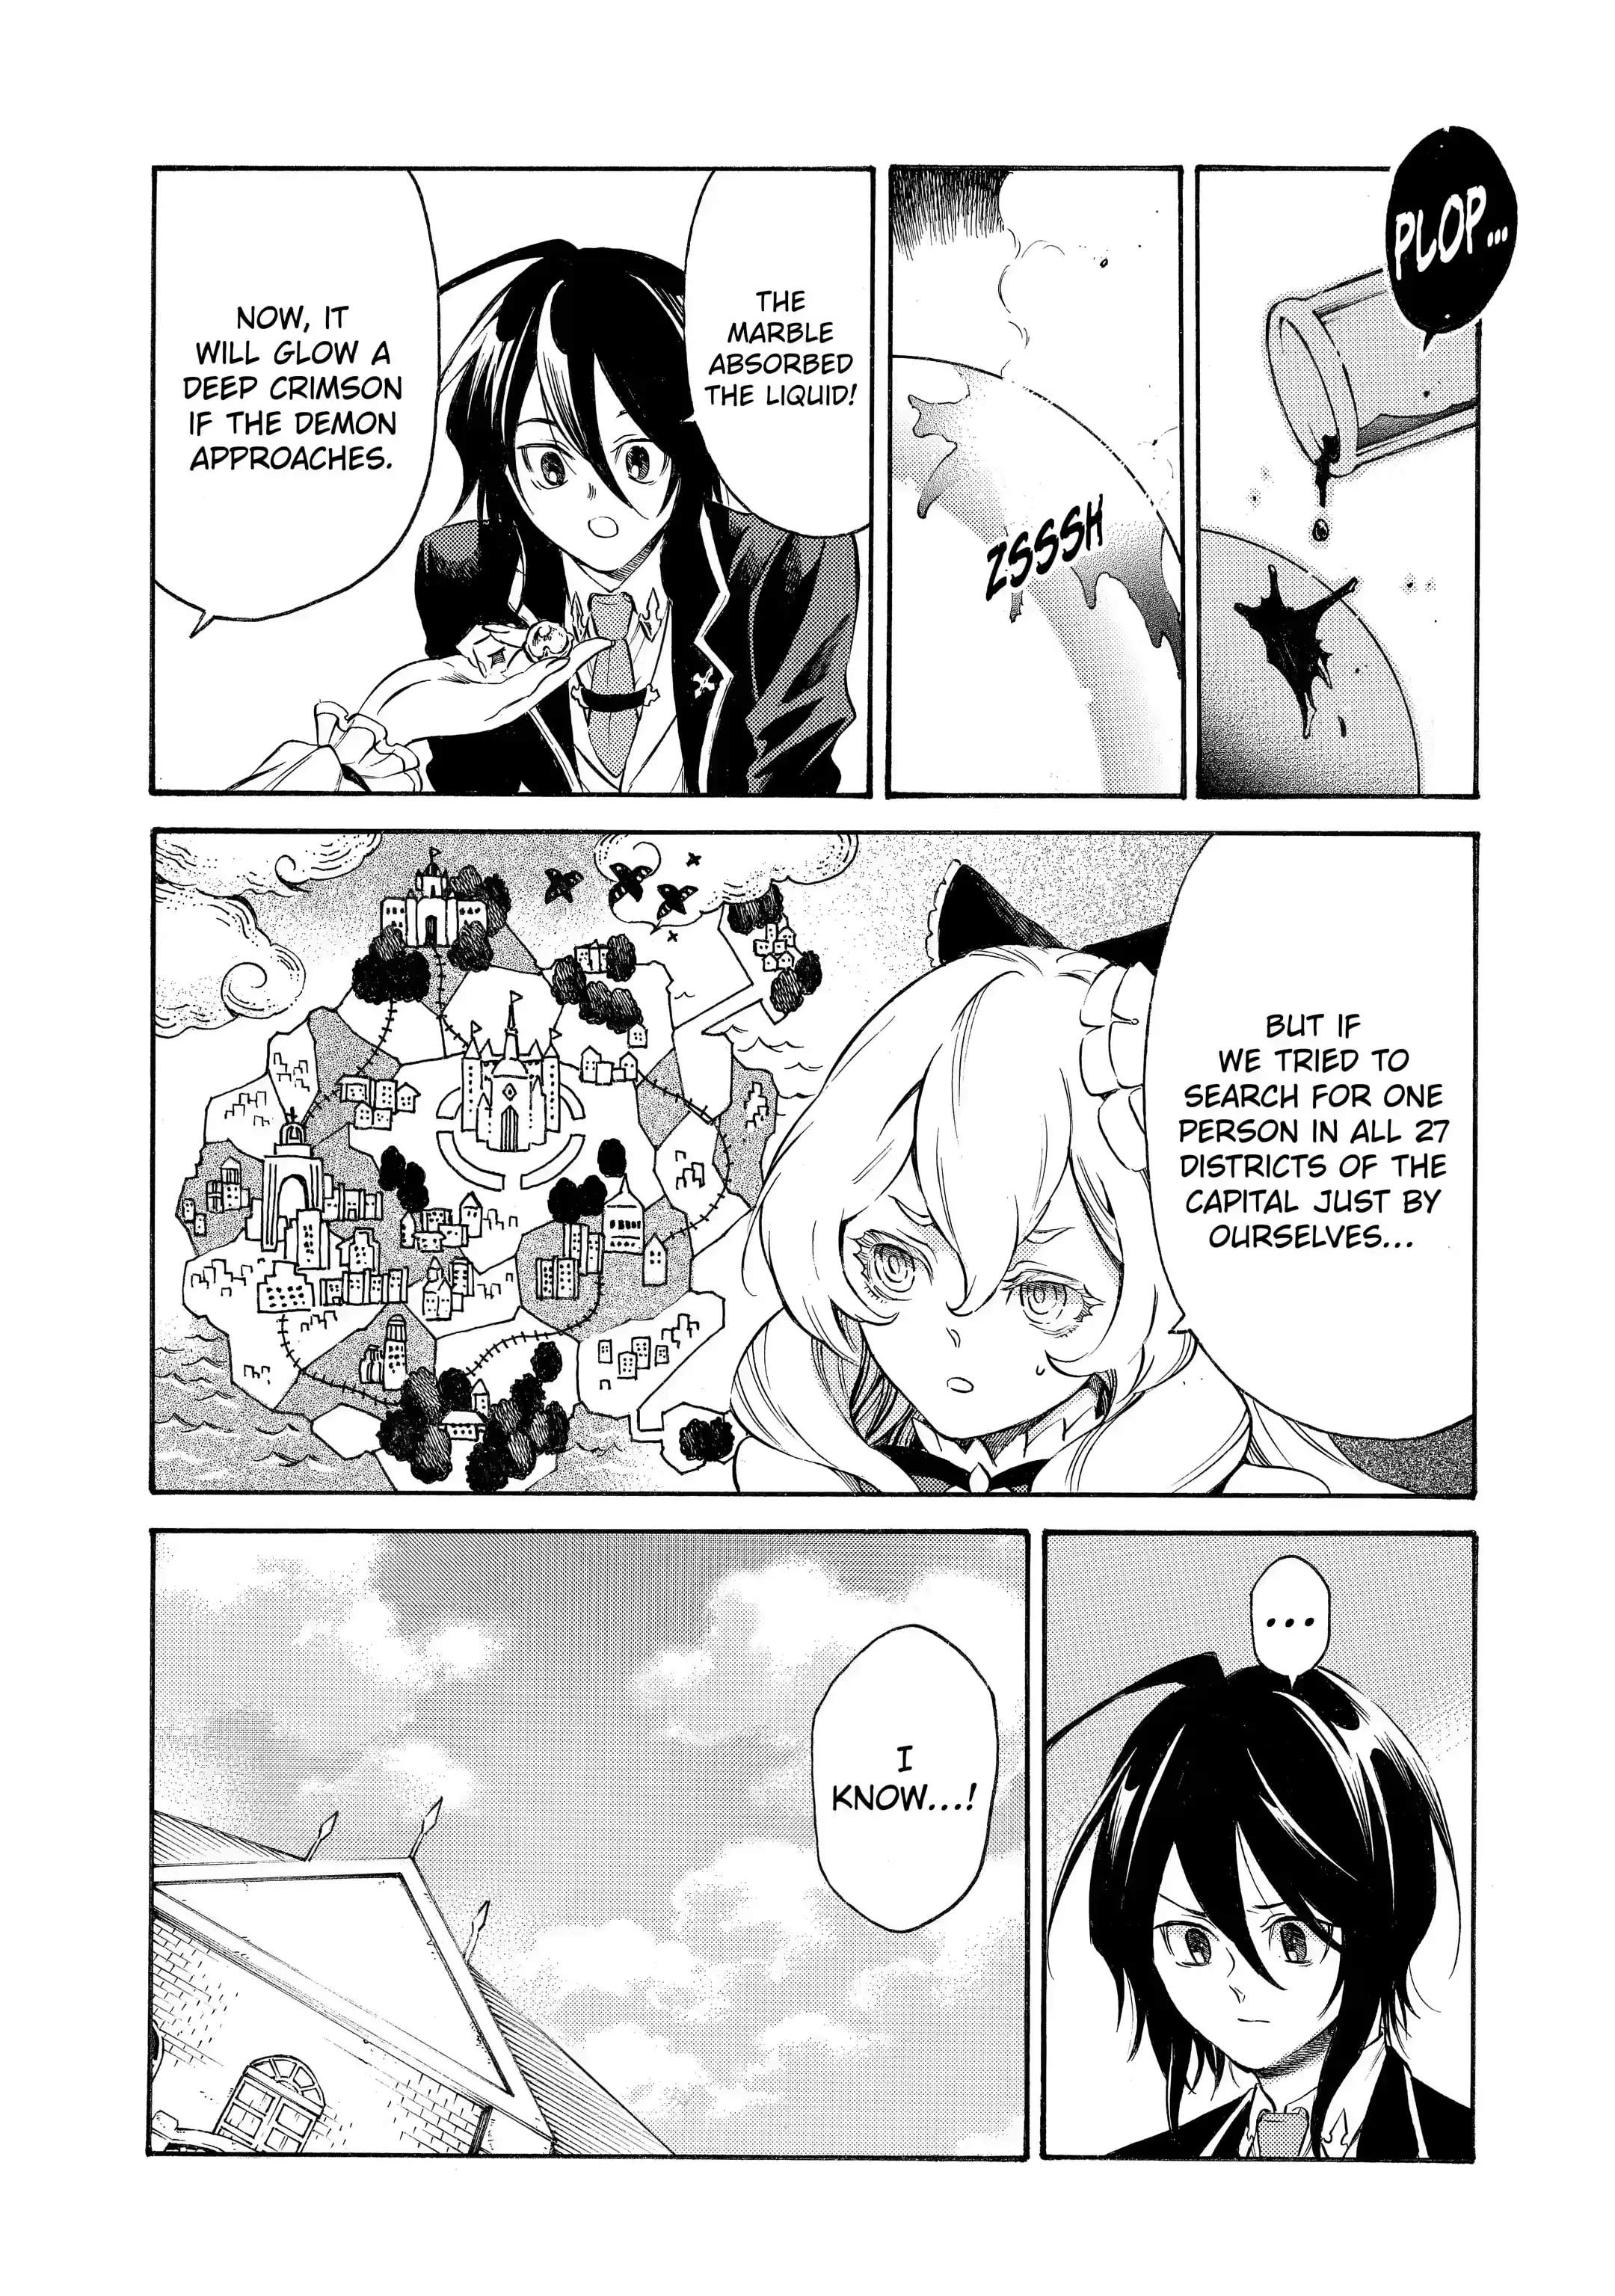 Reincarnation of the Unrivalled Time Mage: The Underachiever at the Magic Academy Turns Out to Be the Strongest Mage Who Controls Time! Chapter 9.1-eng-li - Page 8